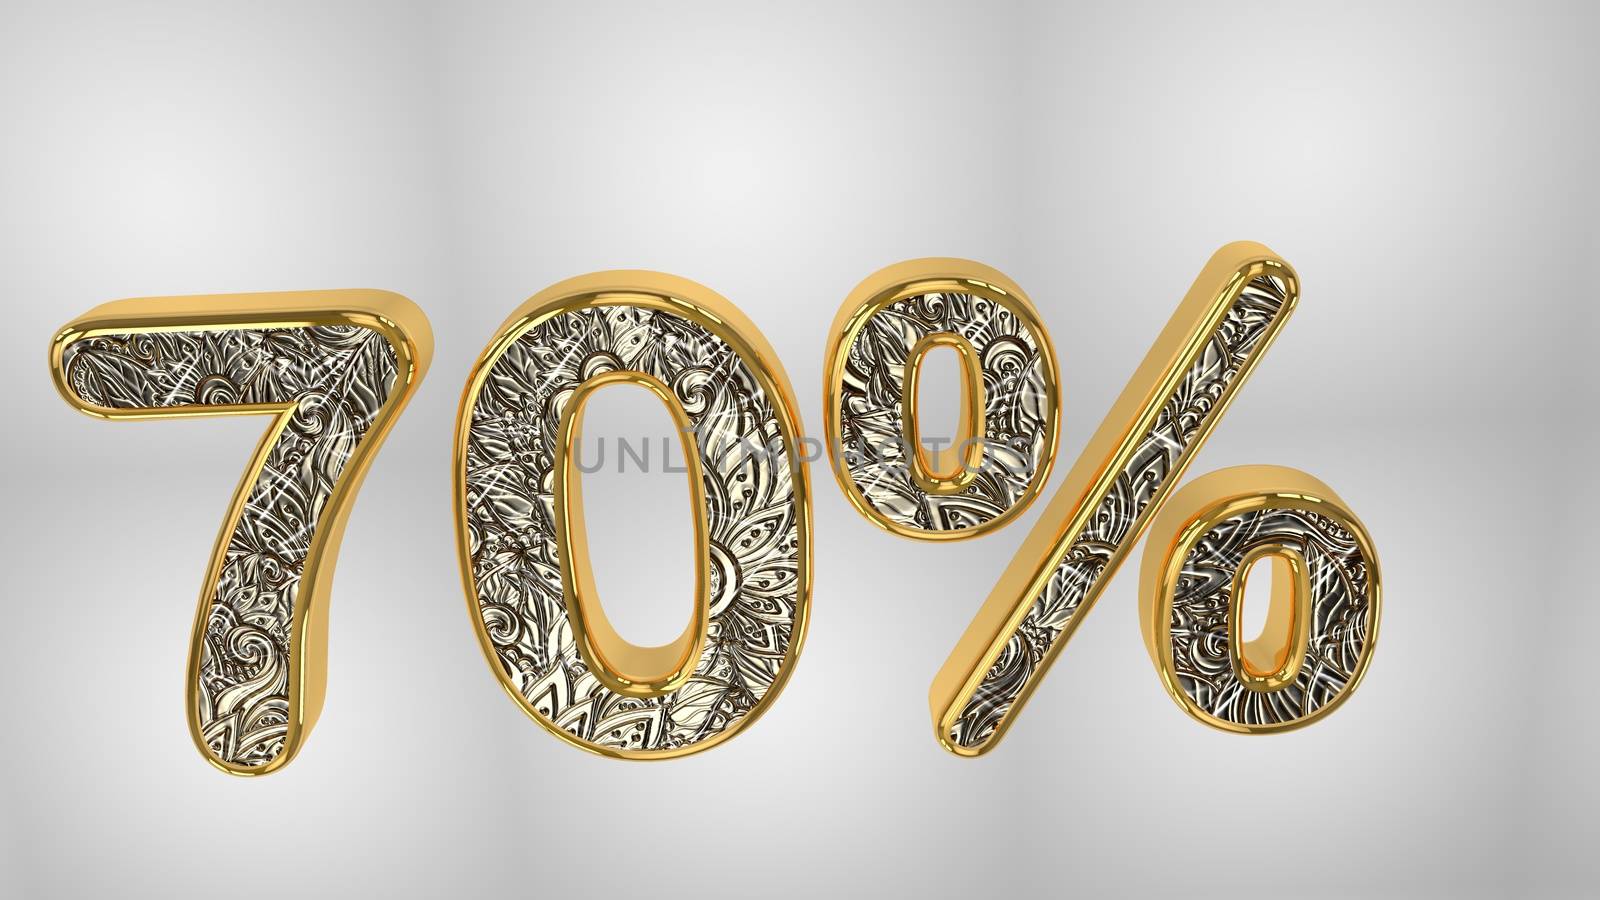 % off discount promotion sale made of realistic gold helium text, 3D rendering by Photochowk